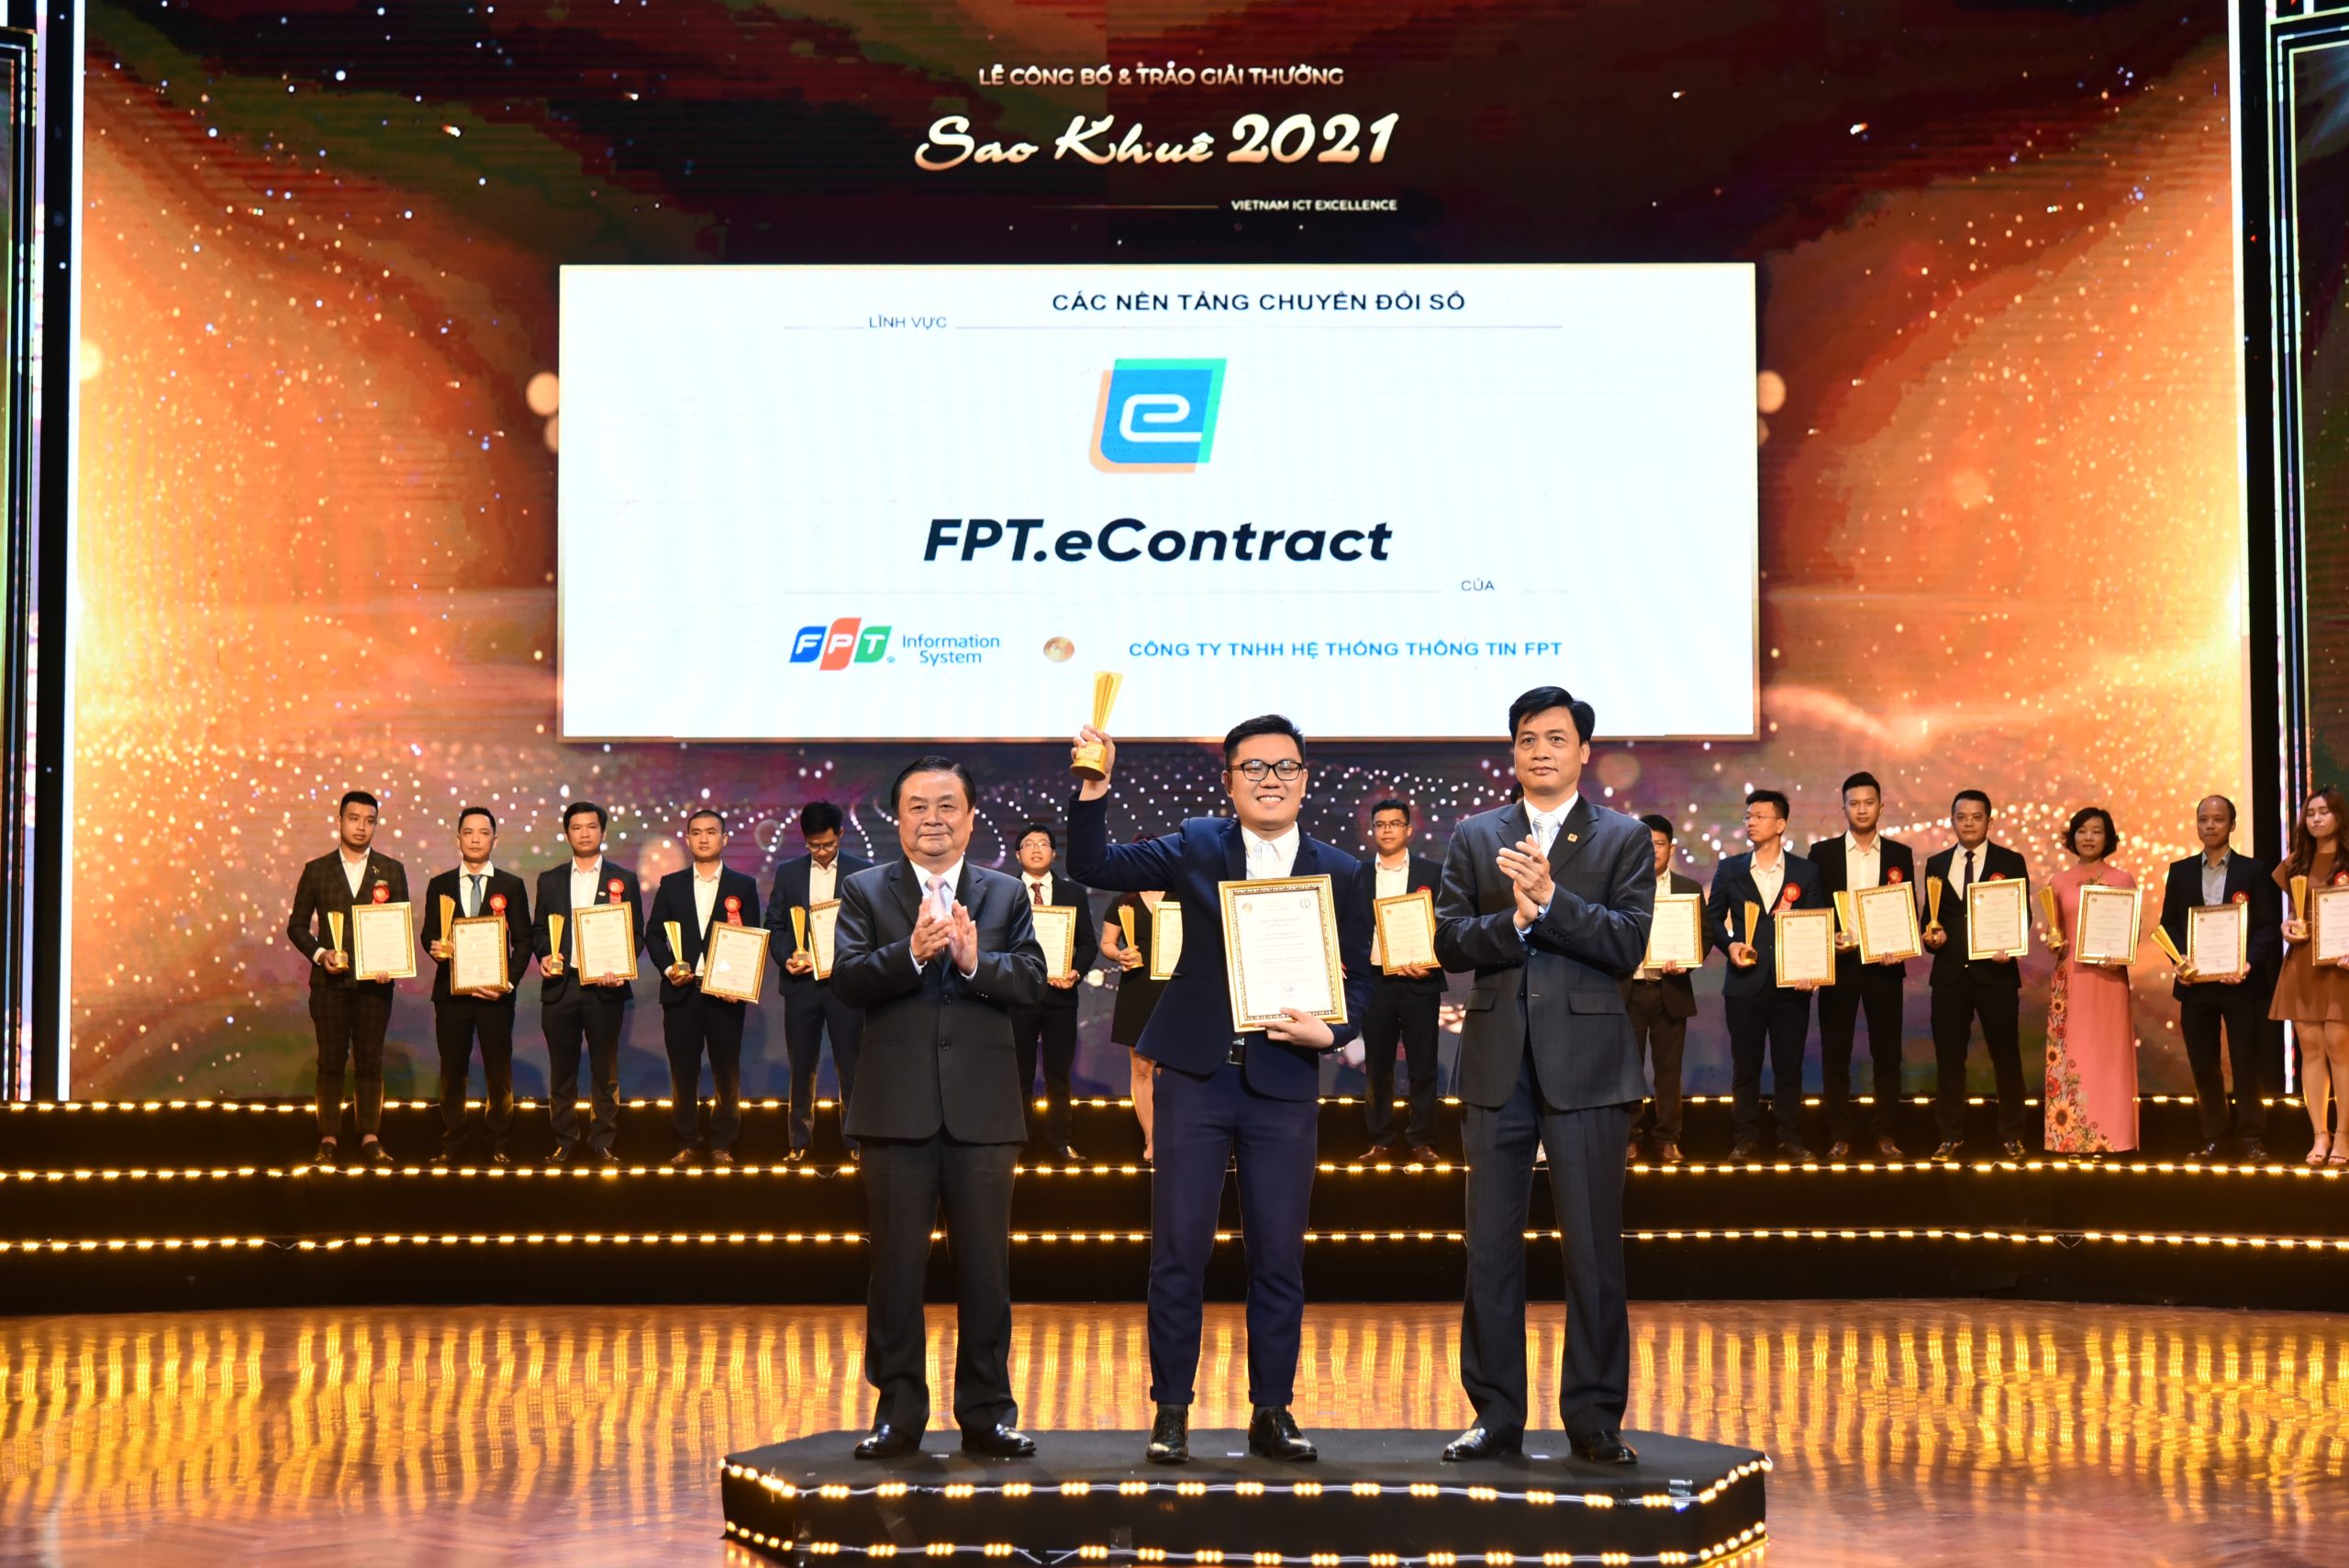 2021 Sao Khue Awards (Vietnam ICT Excellence) – Electronic Contract Solution (FPT.eContract)